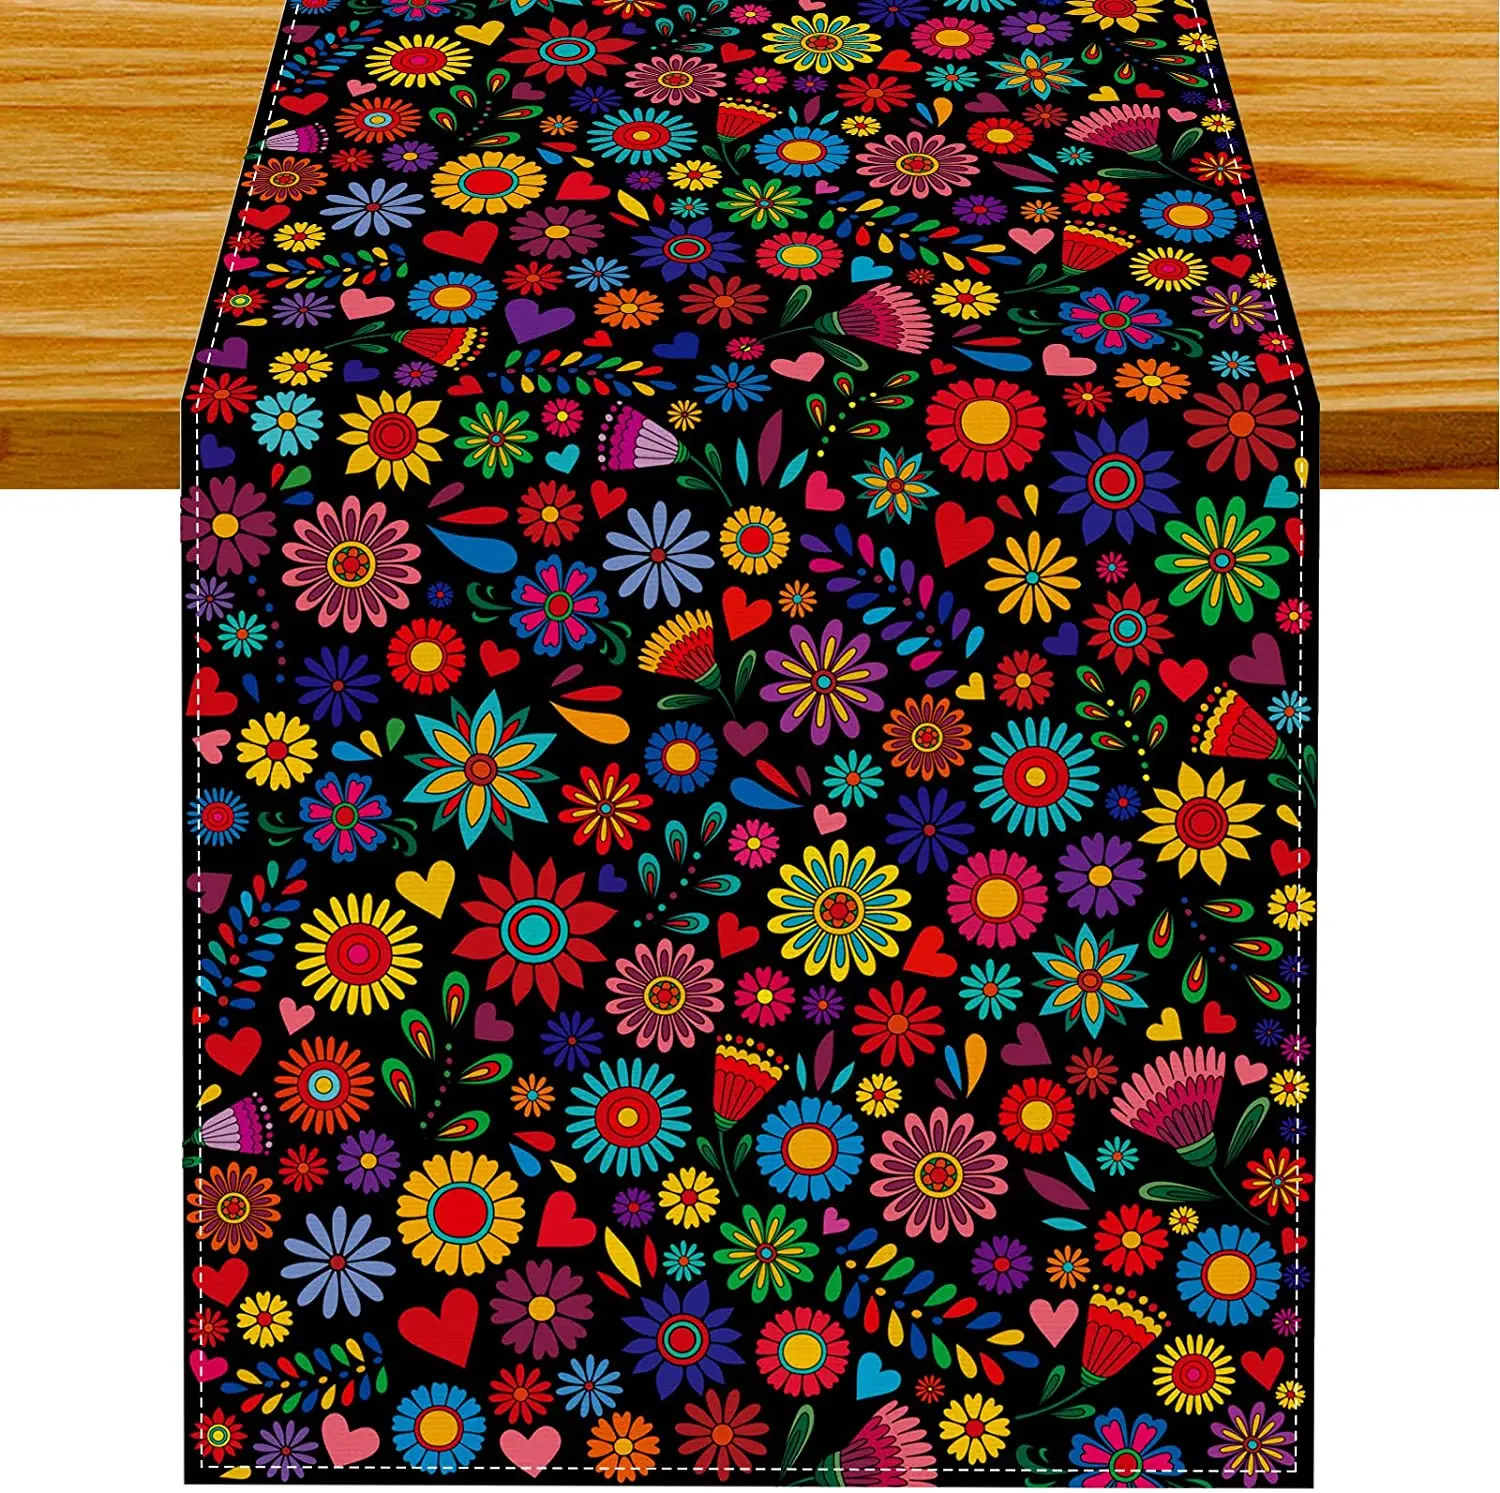 

Colorful Mexico Abstract Flower Modern Table Runner ART Tablecloth Wedding Party Dinner Coffee Table Decoration Cloth